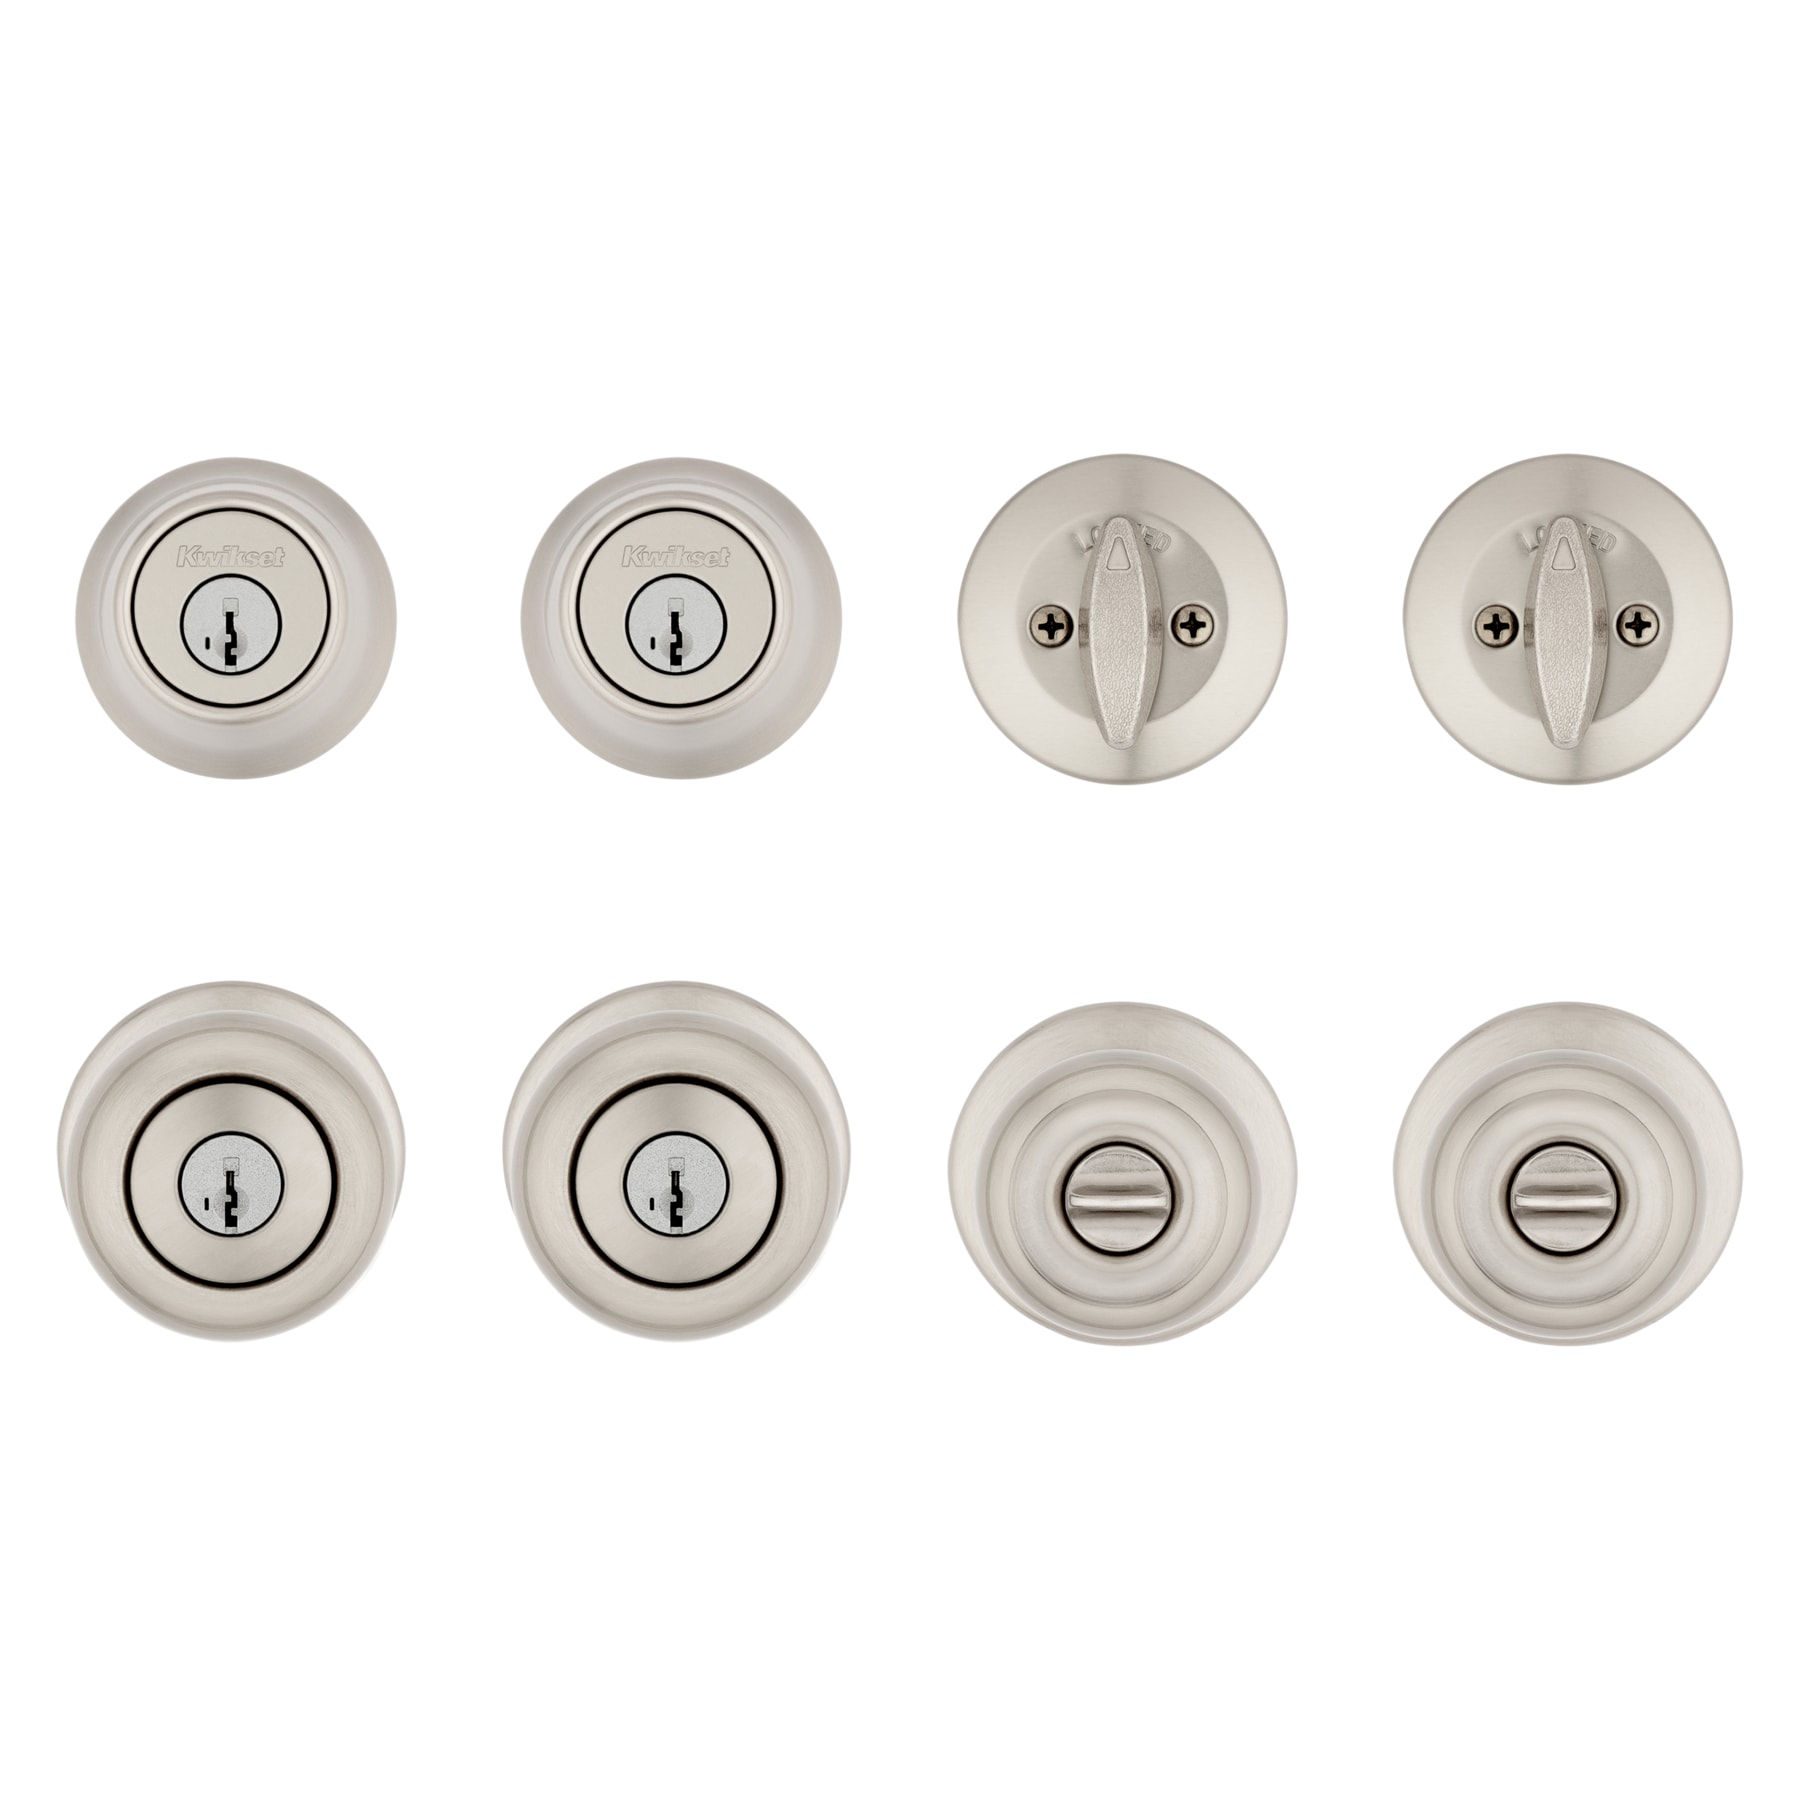 Kwikset Series Cove Satin Nickel Smartkey Exterior Single-cylinder deadbolt  Combined Door Knob Contractor Pack with Antimicrobial Technology (4-Pack)  in the Door Knobs department at